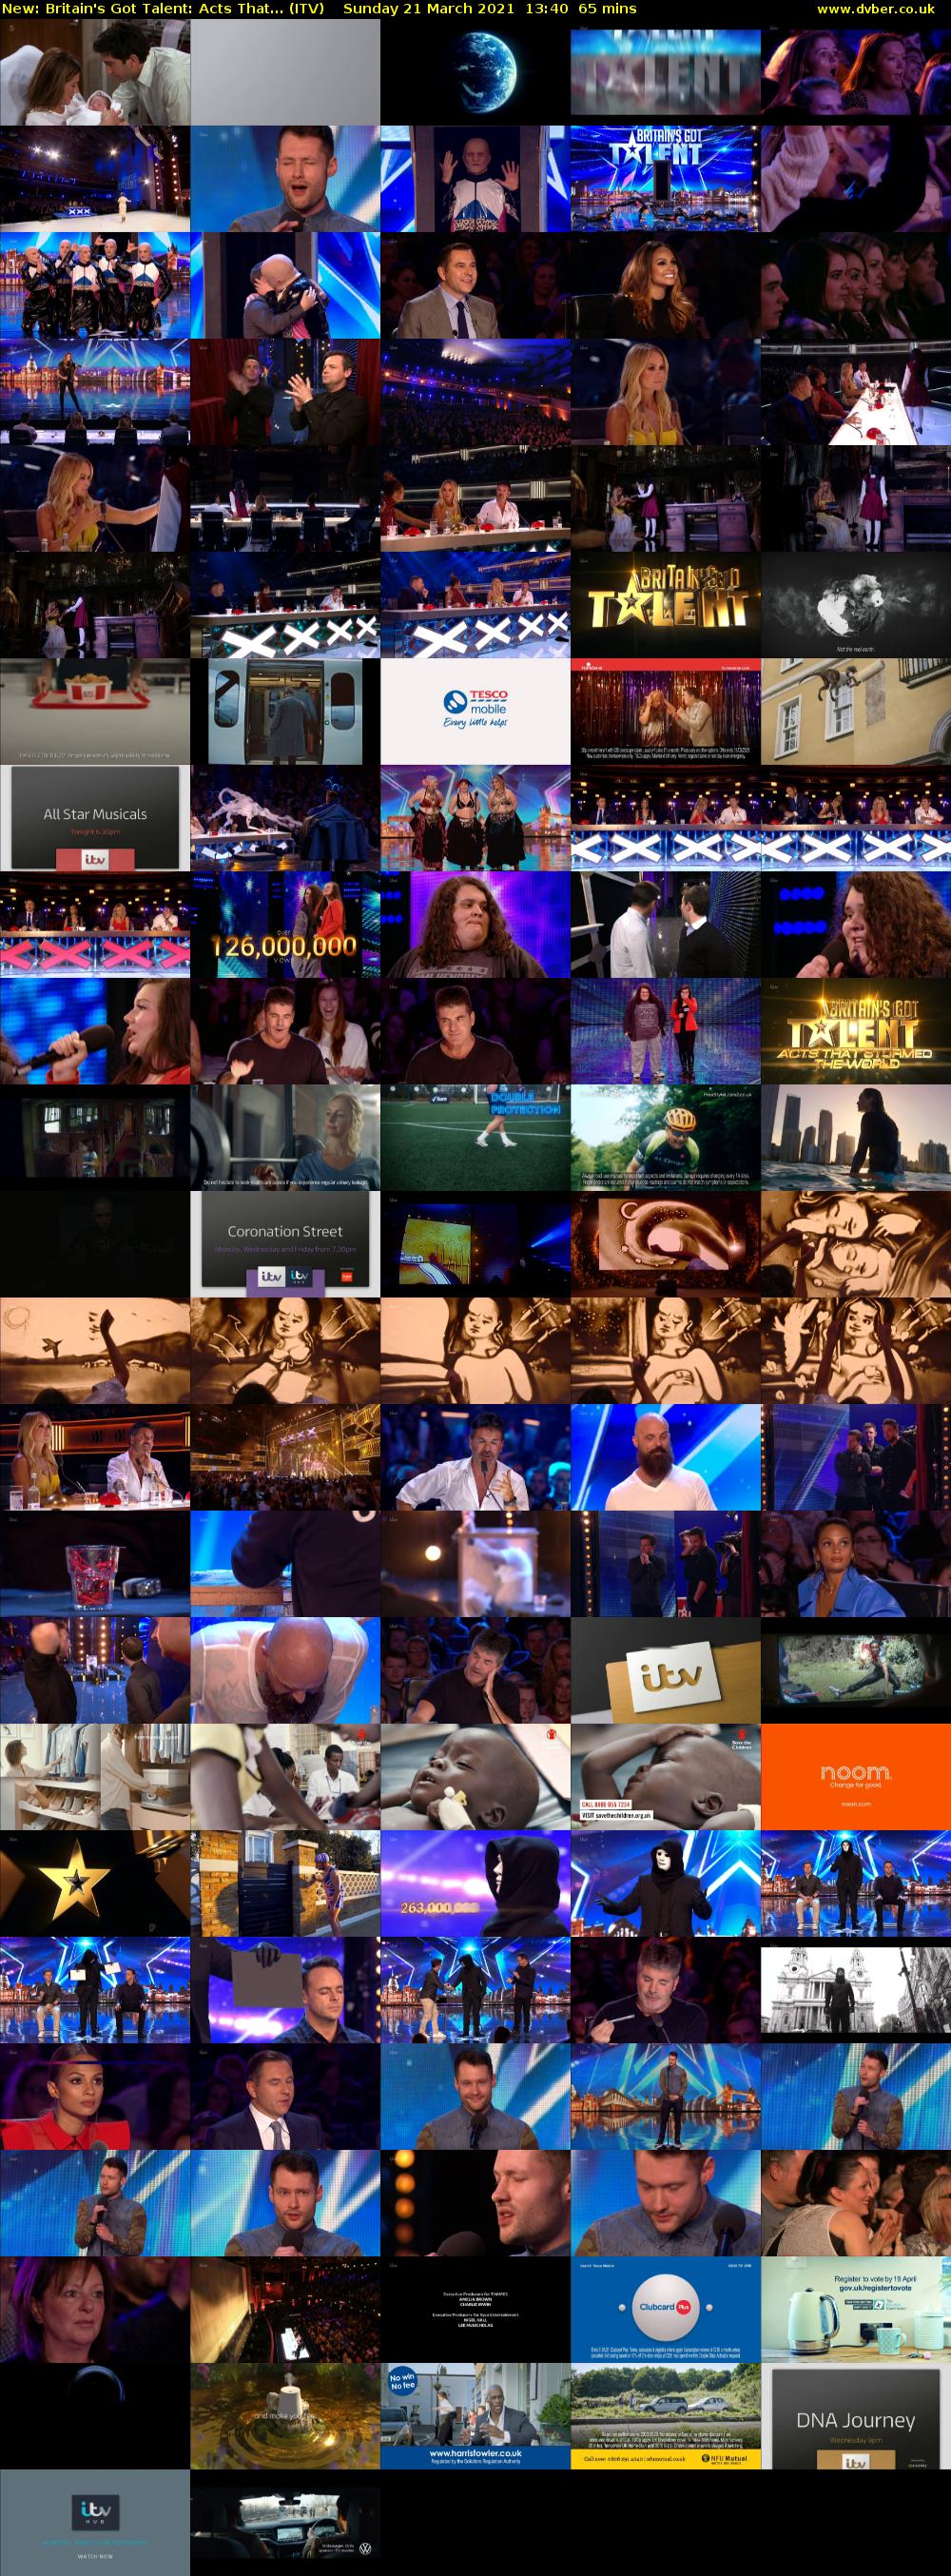 Britain's Got Talent: Acts That... (ITV) Sunday 21 March 2021 13:40 - 14:45